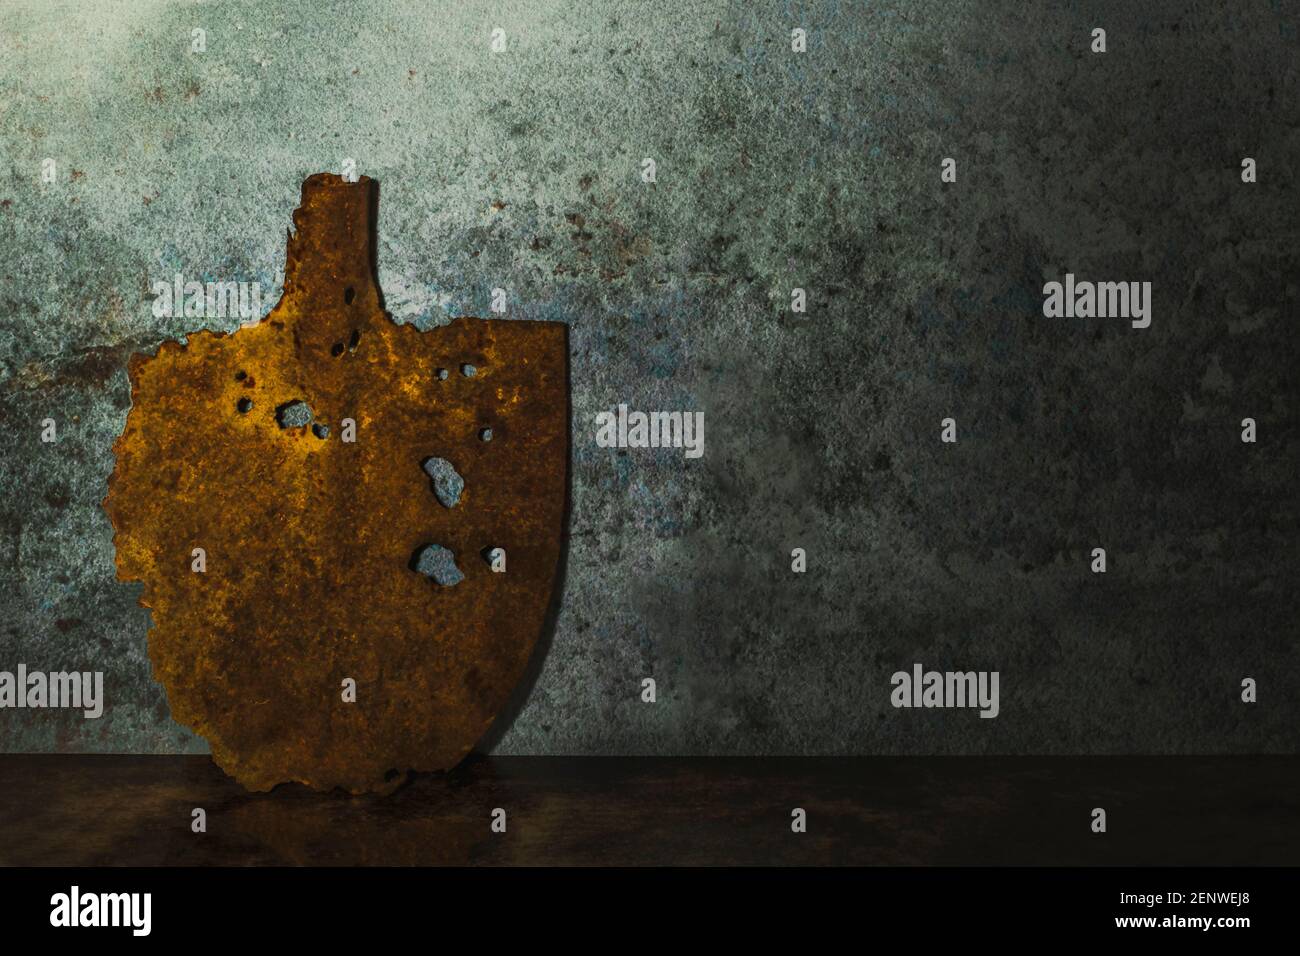 Old vintage, rusty shovel leaning against a grunge wall. Dark gloomy artistic still life photography. Blade antique round digger with empty space. Stock Photo